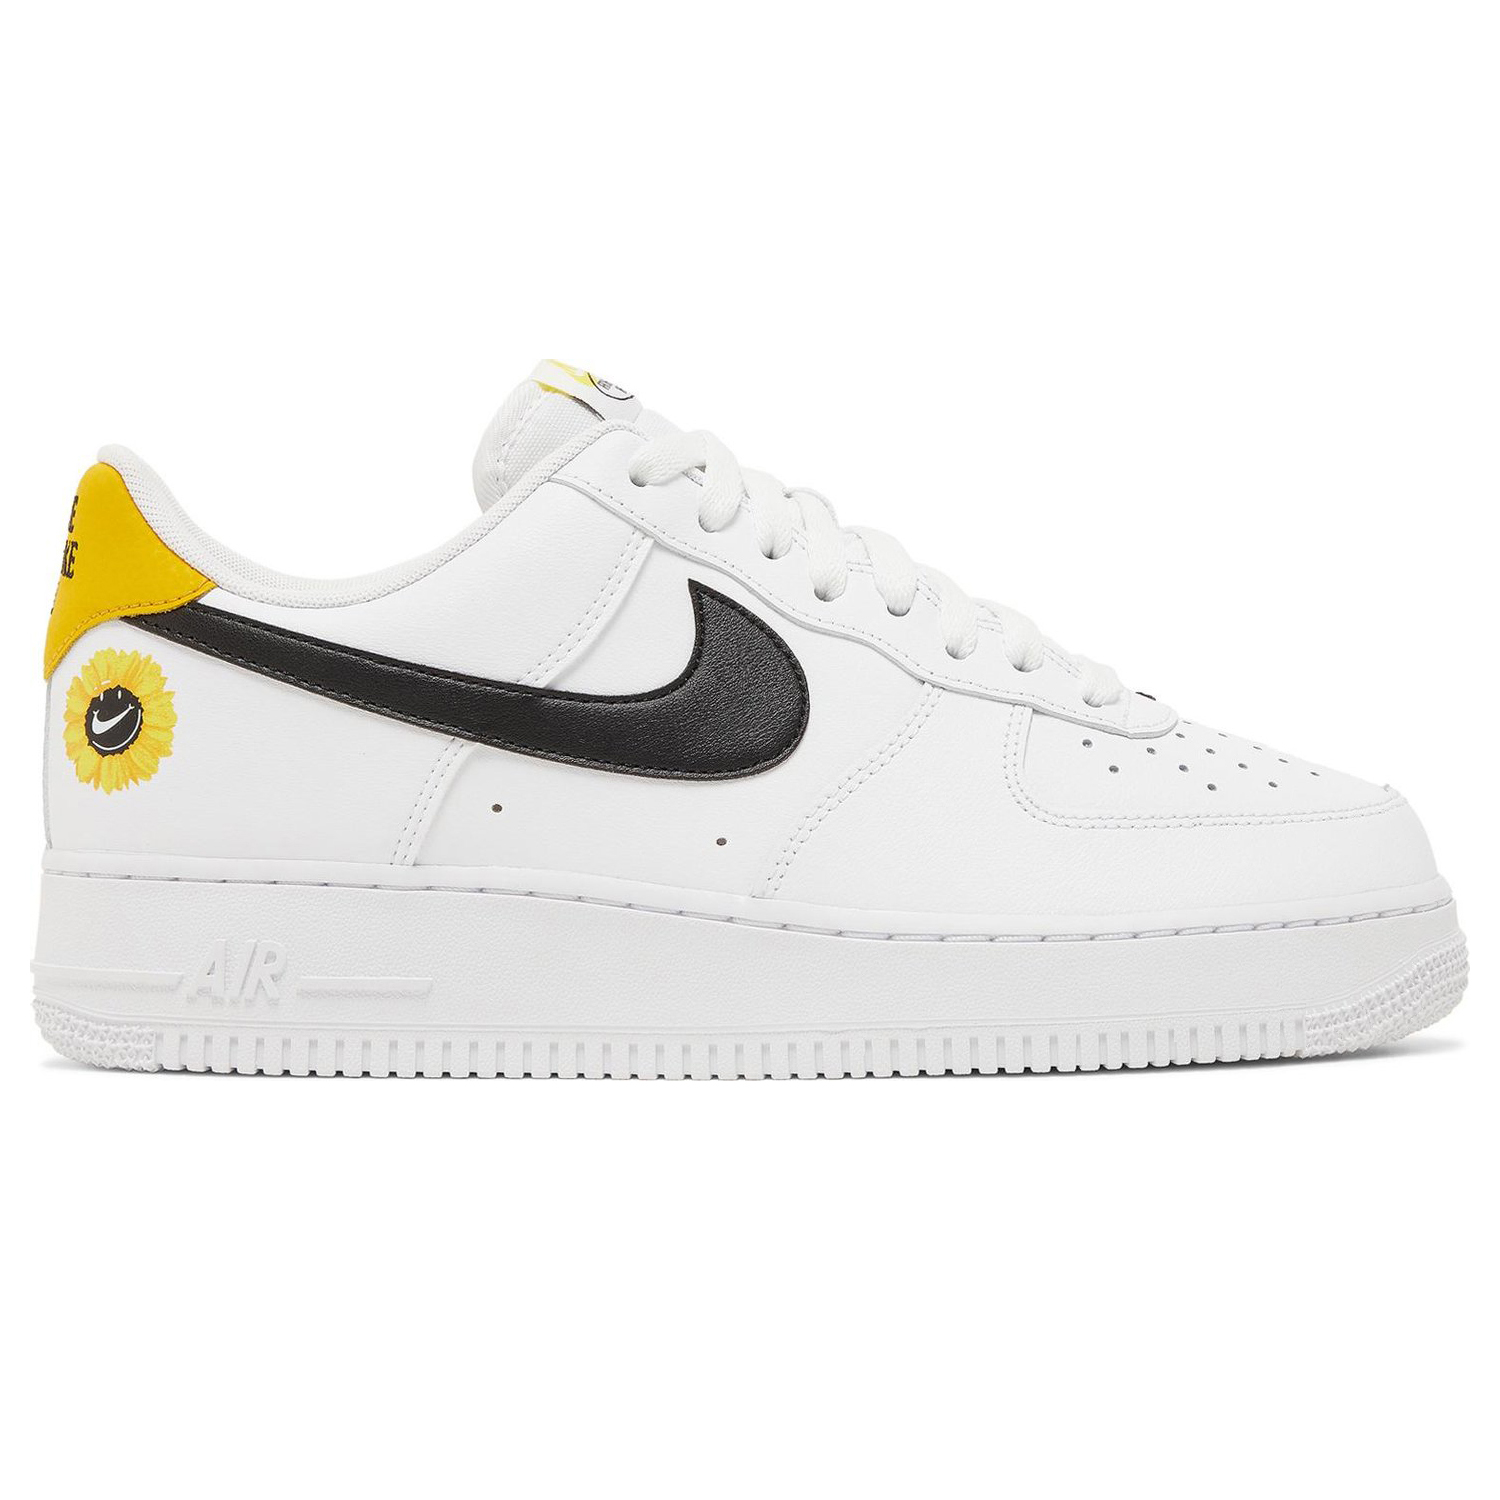 Кроссовки Nike Air Force 1 '07 LV8 2 'Have A Nike Day', белый stand up collar baseball uniform youth air force flight suit men air force pilot jacket men